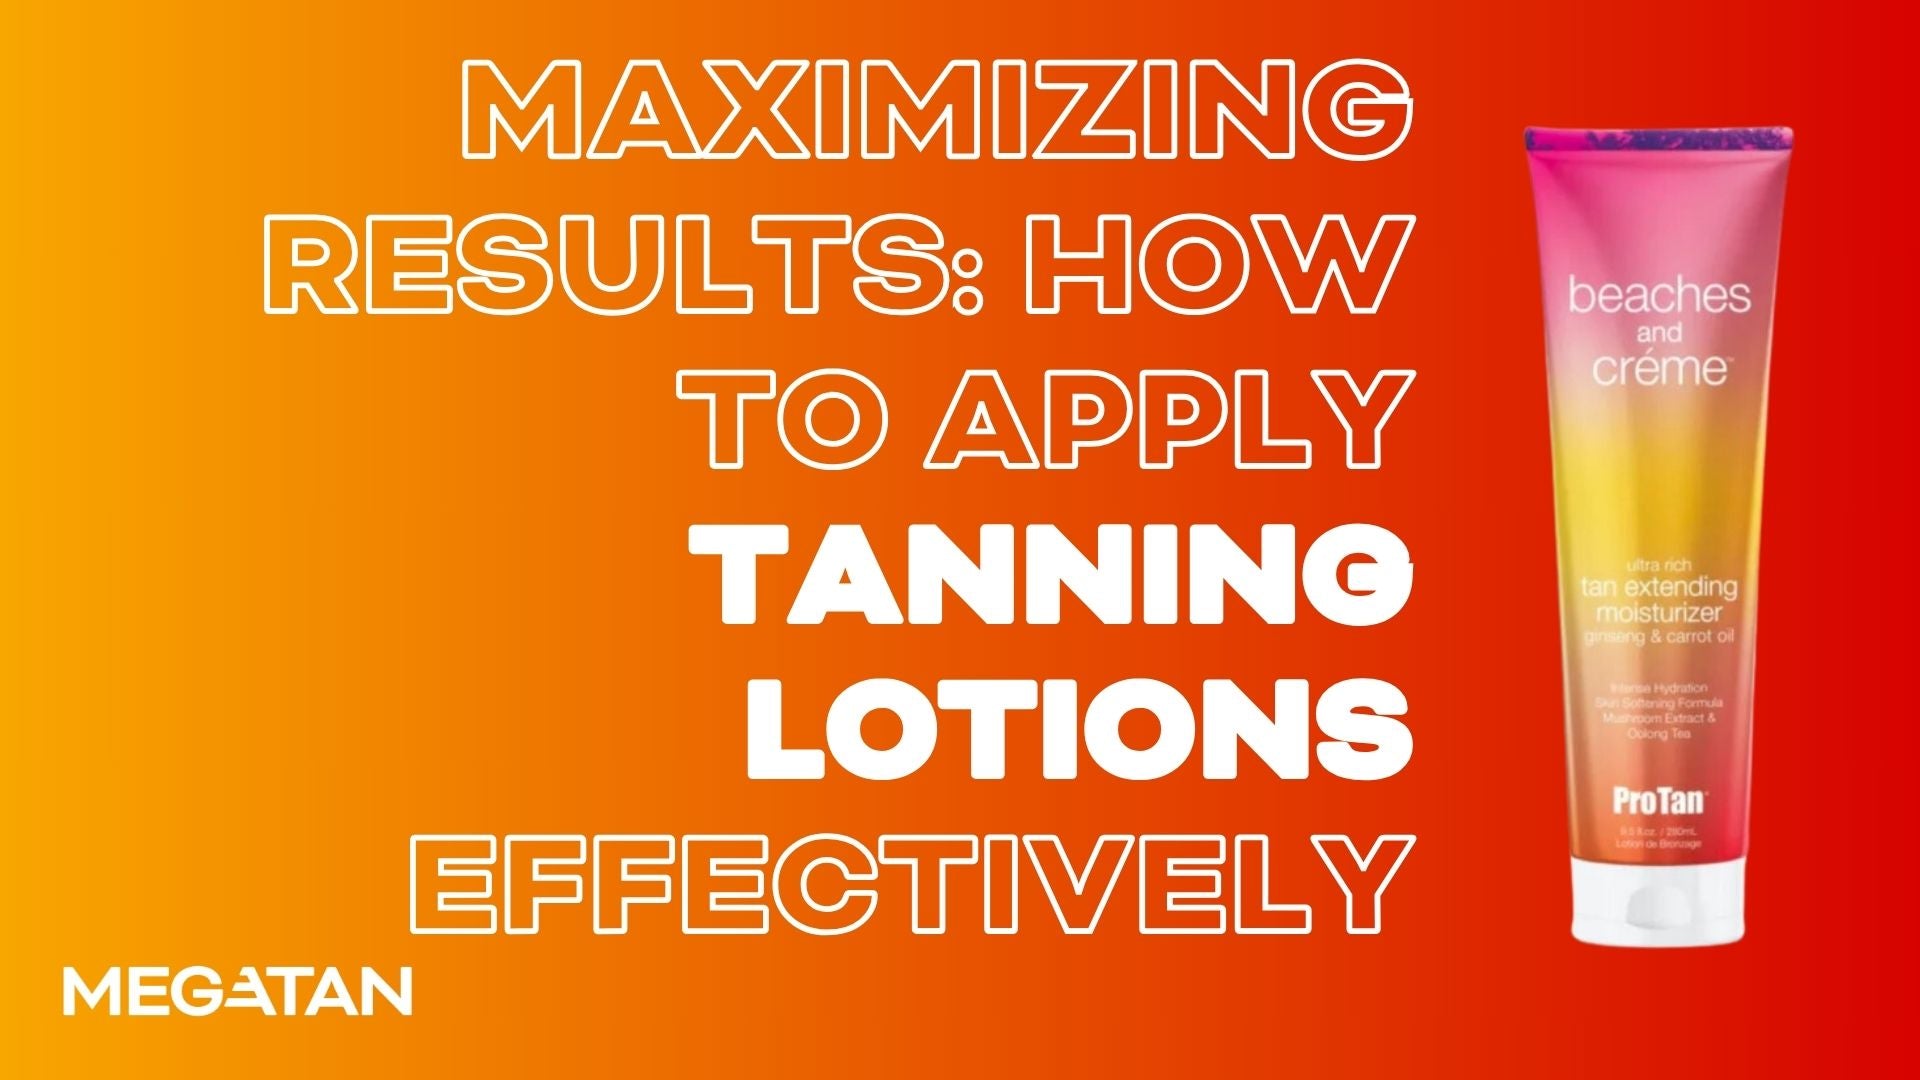 Maximizing Results: How to Apply Tanning Lotions Effectively